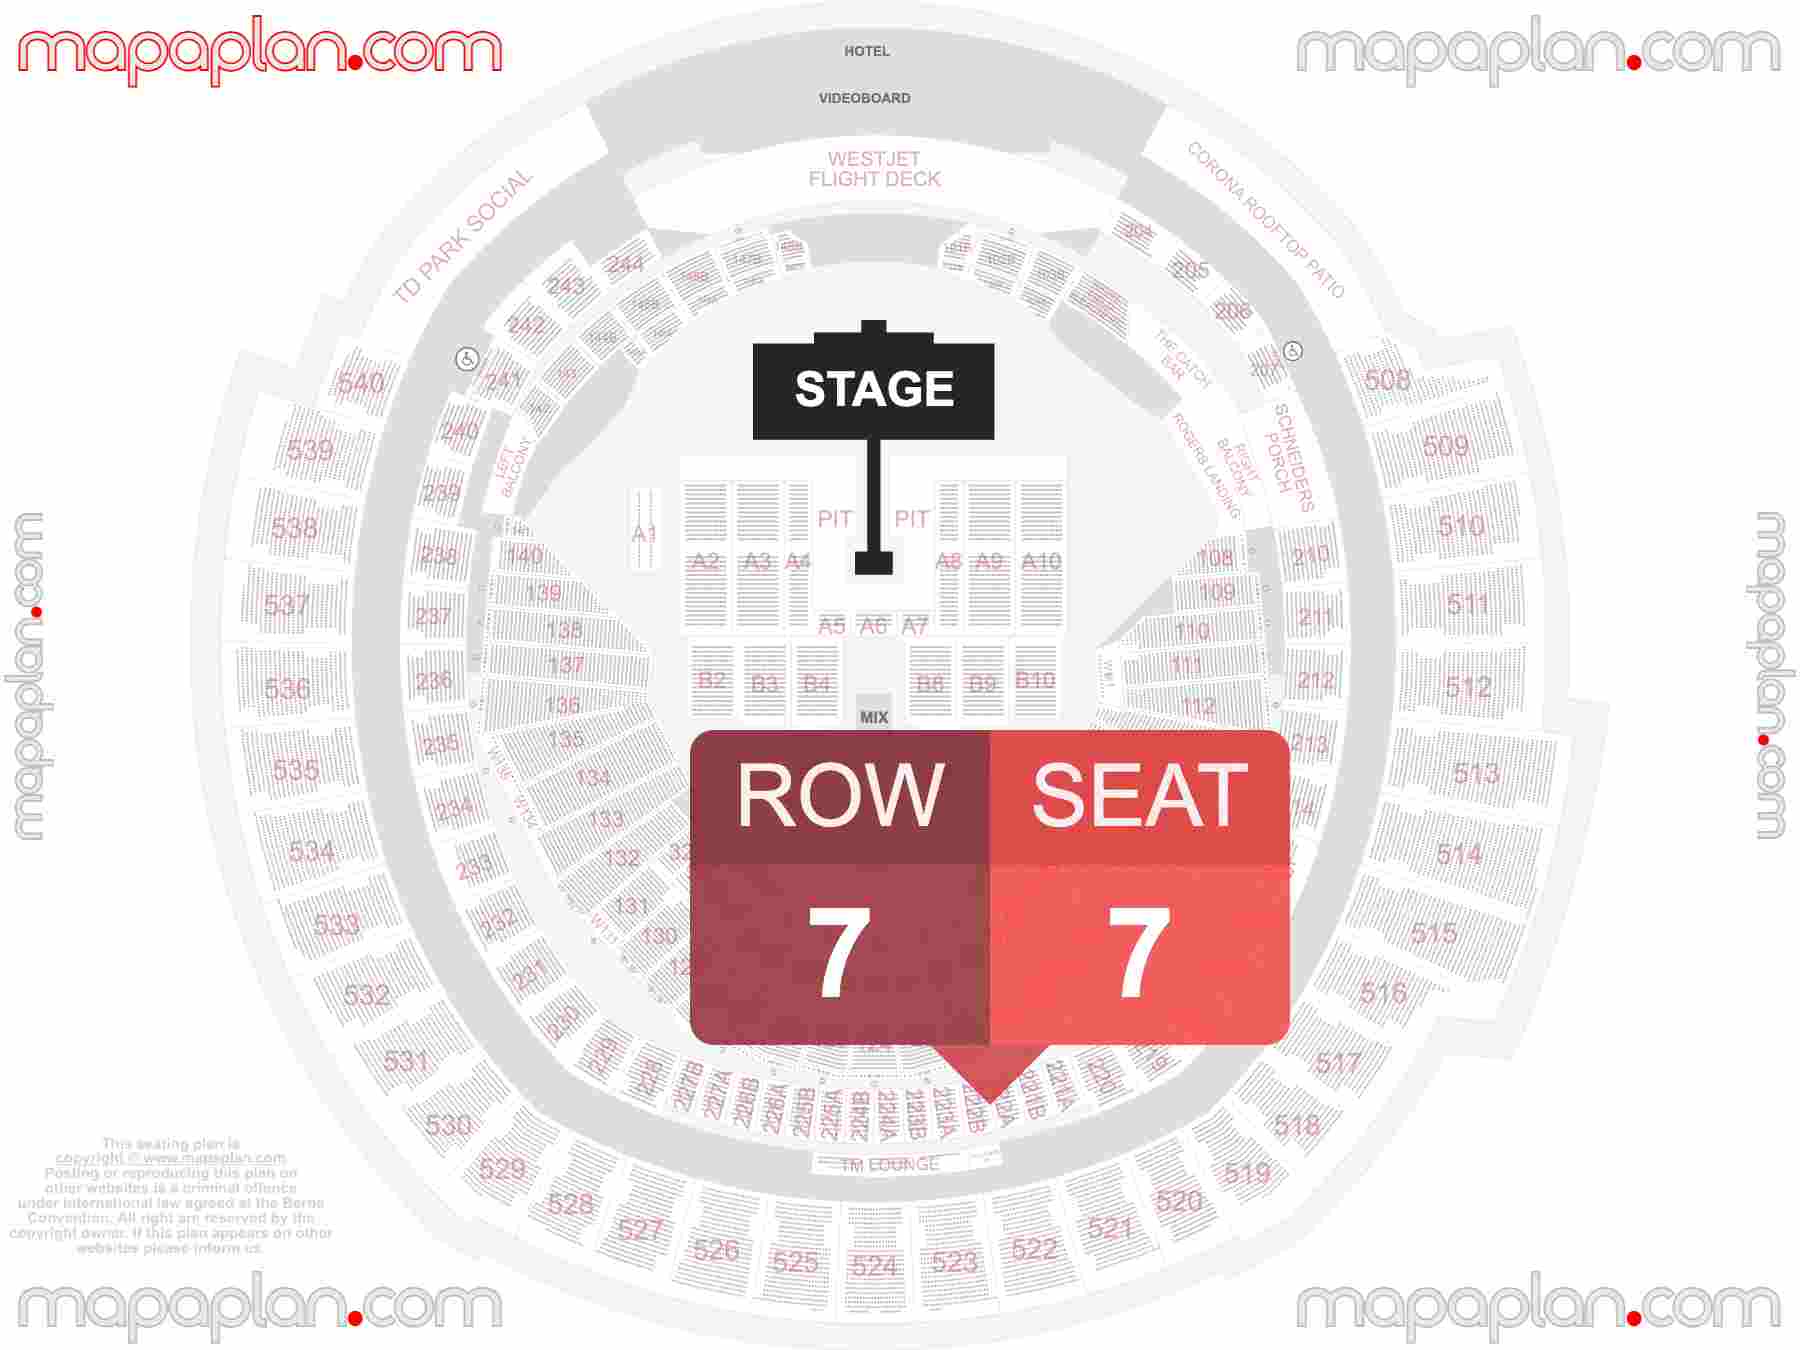 Toronto Rogers Centre seating map Concert with general admission PIT floor standing seating map with exact section numbers showing best rows and seats selection 3d layout - Best interactive seat finder tool with precise detailed location data